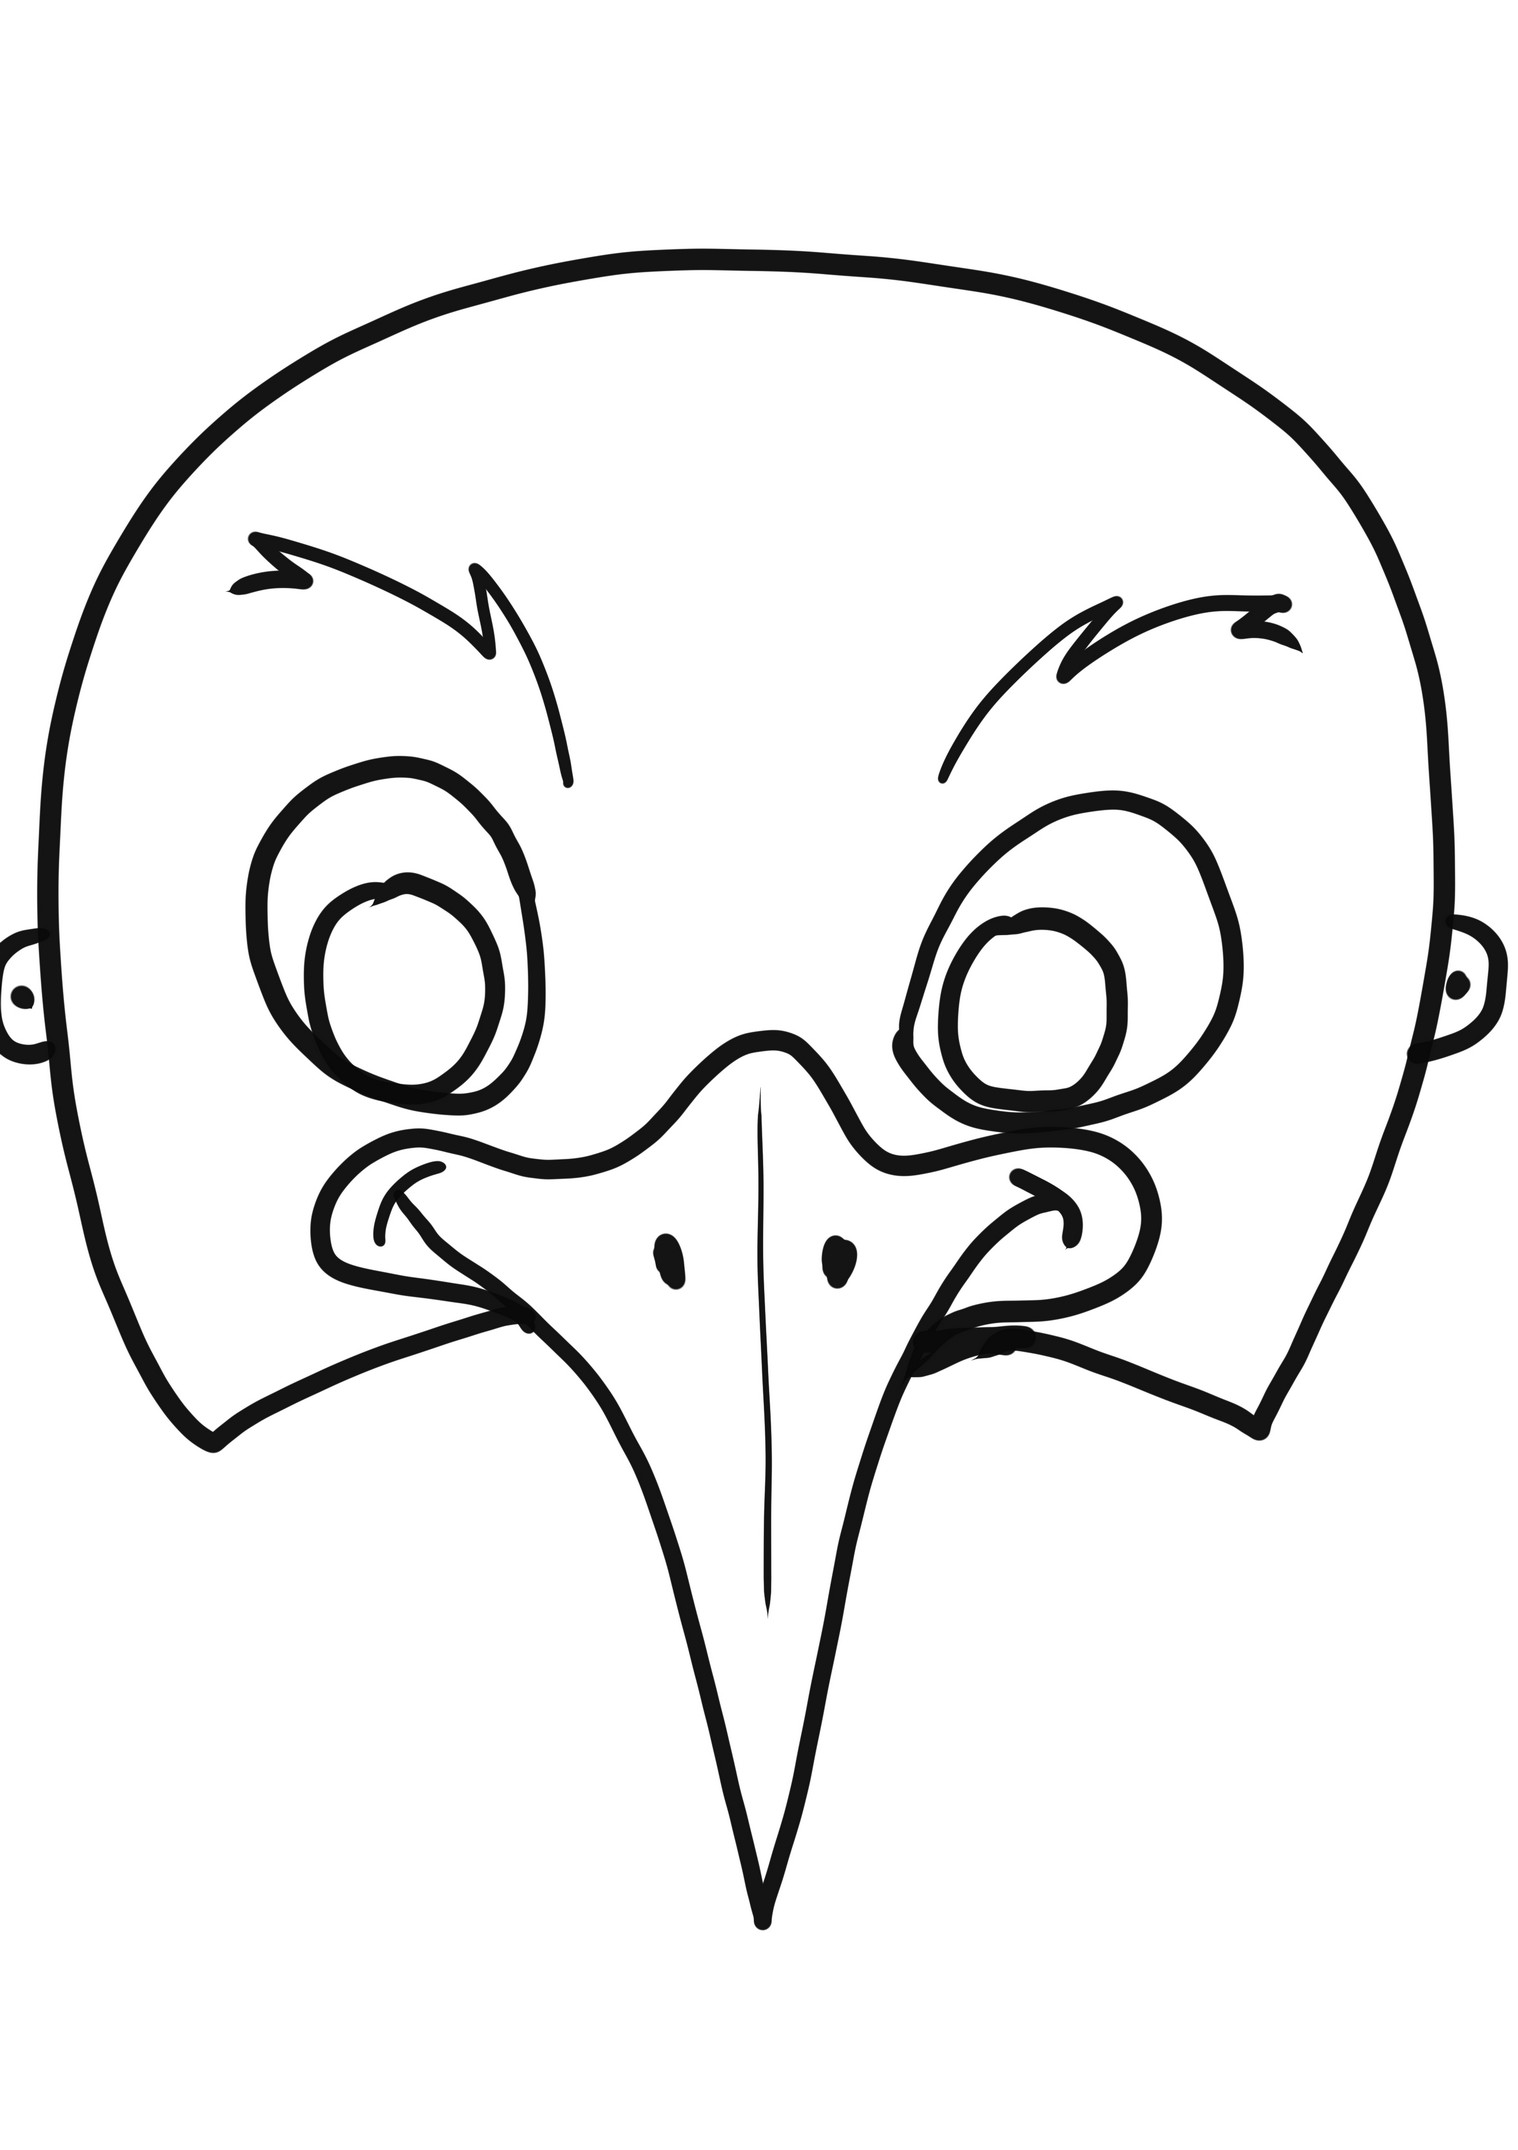 Albatross Mask coloring page to cut out